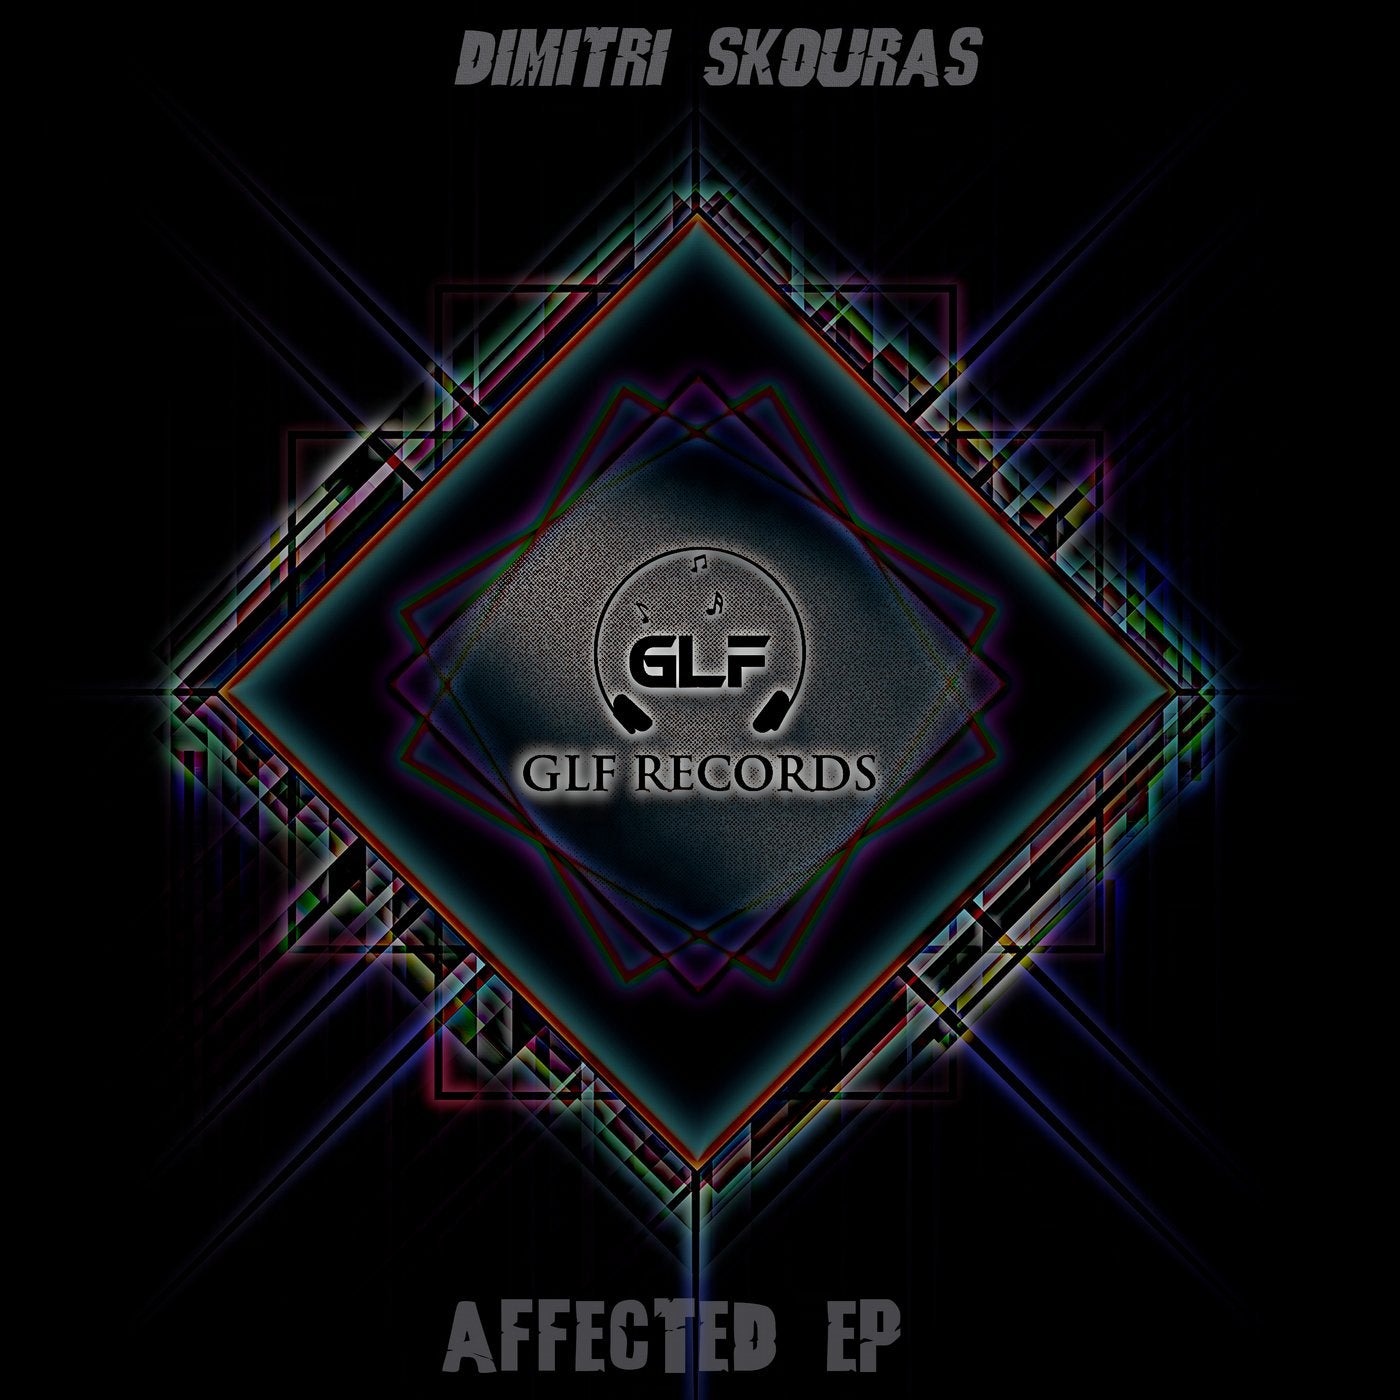 Affected EP